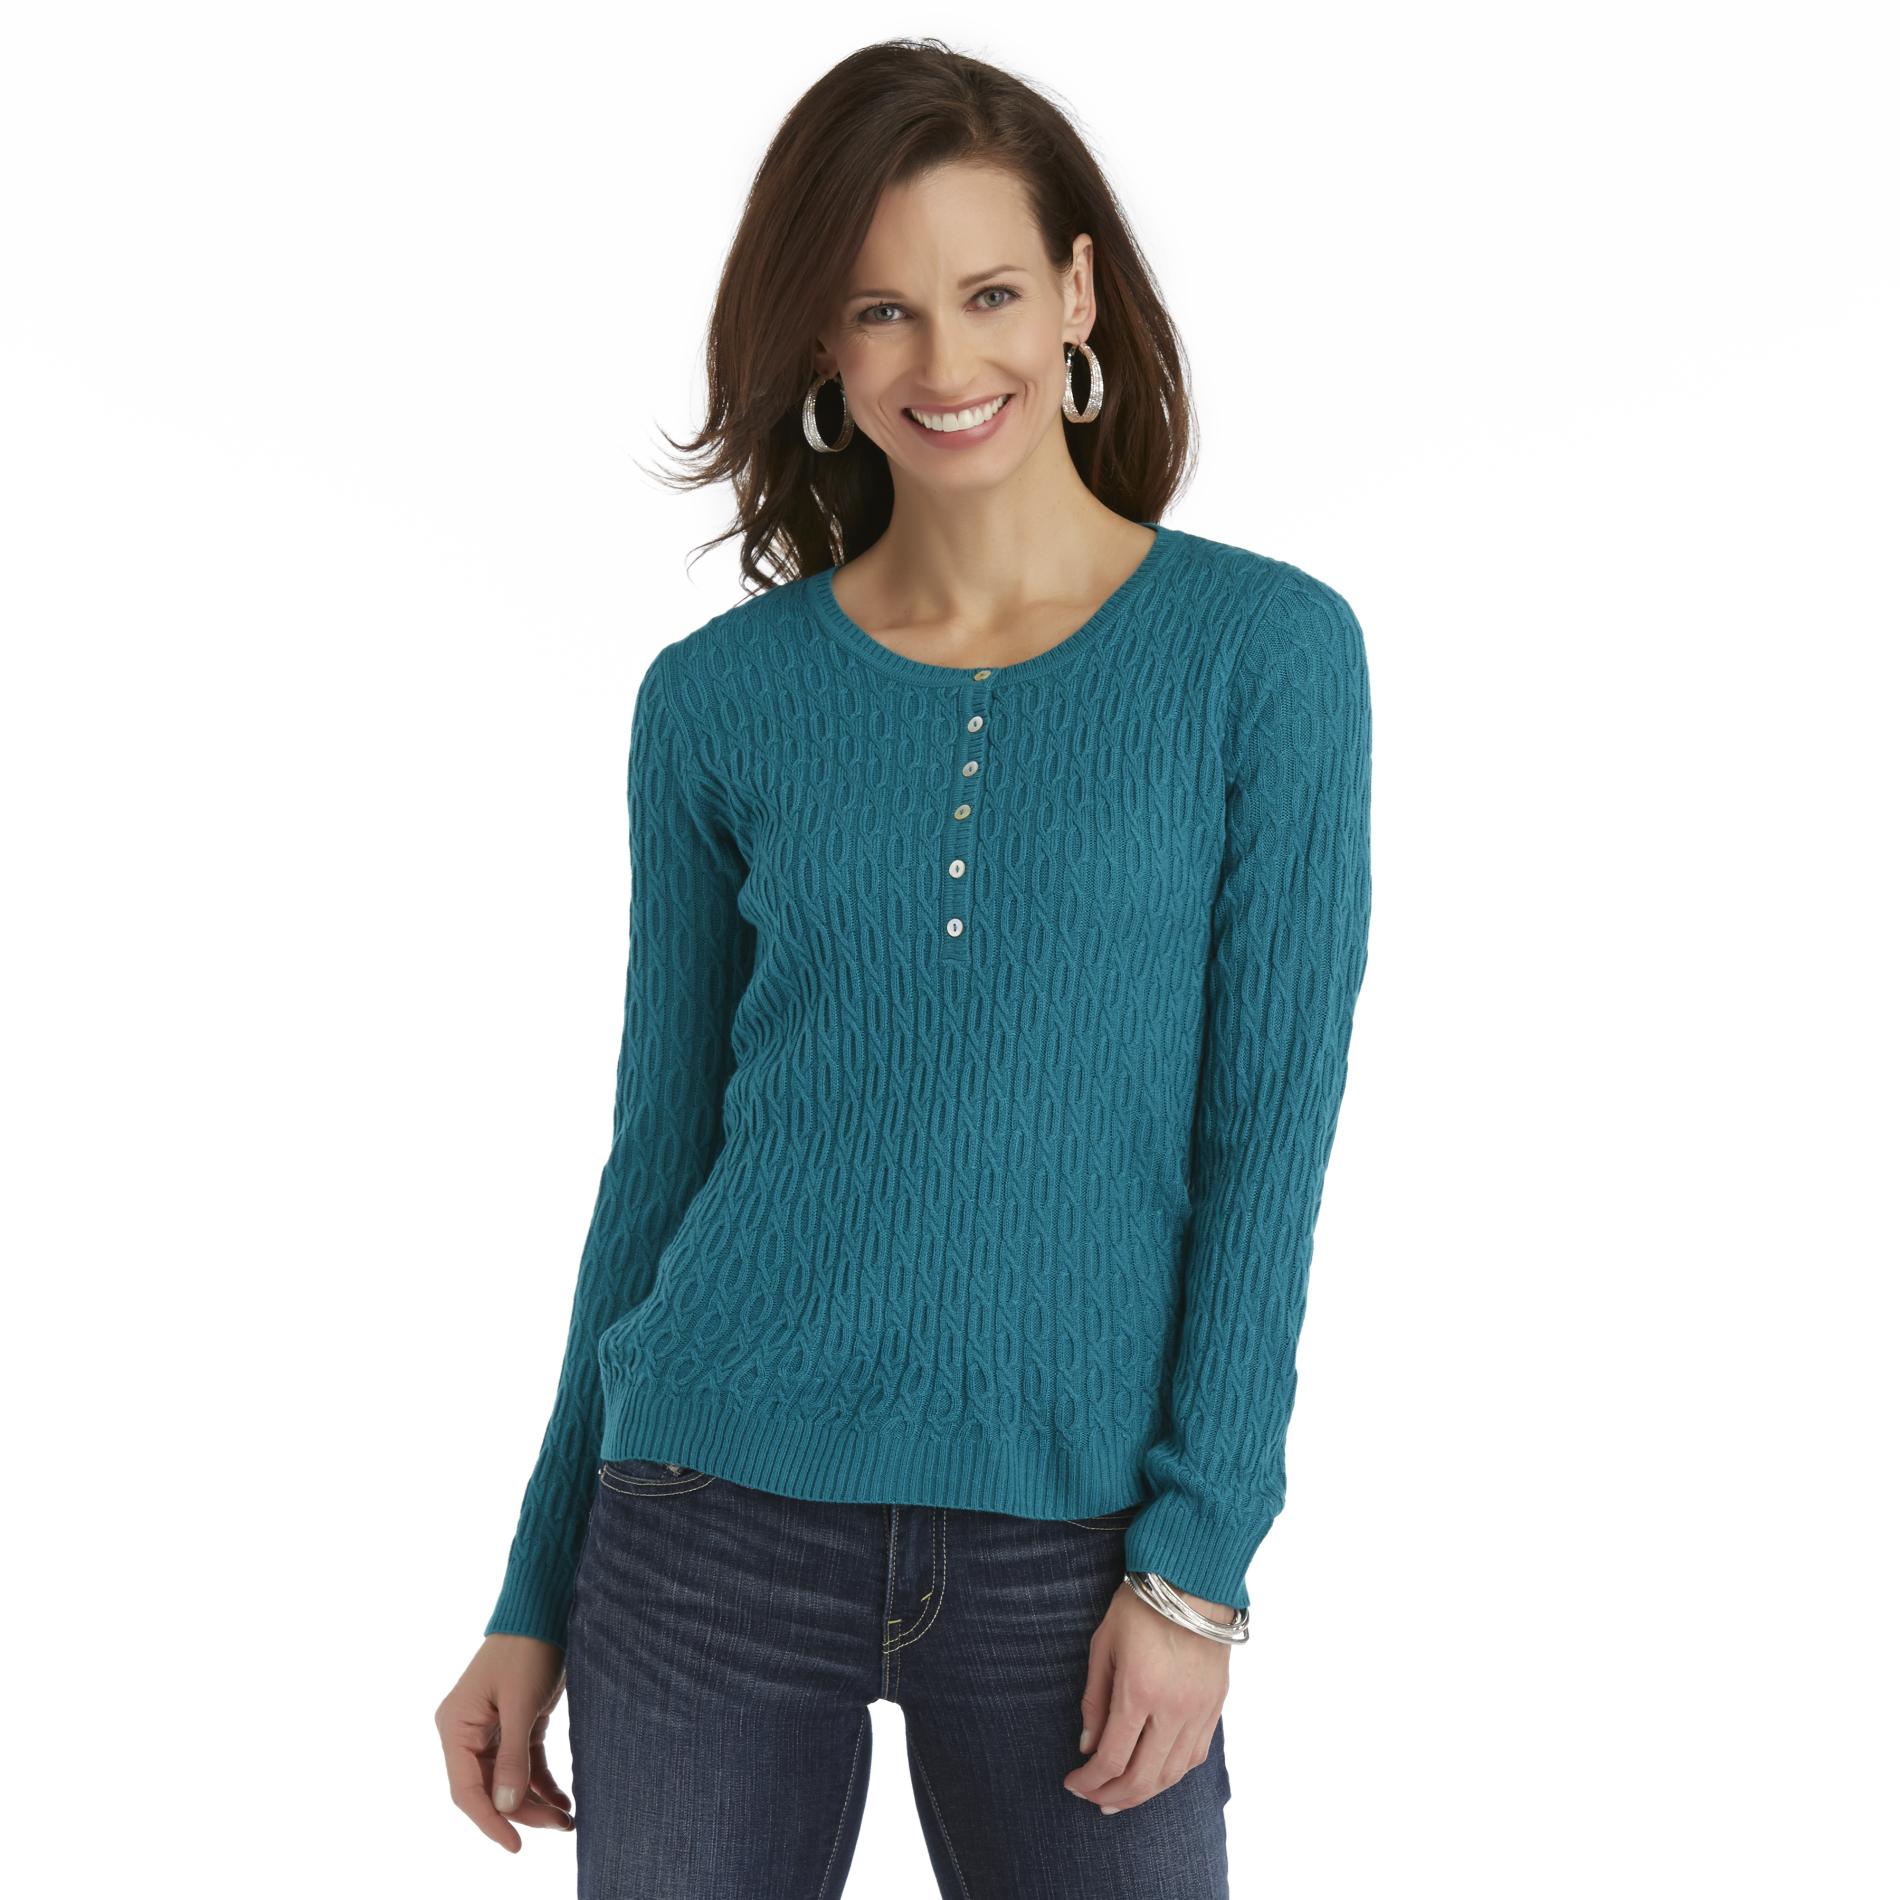 Basic Editions Women's Cable Knit Henley Sweater